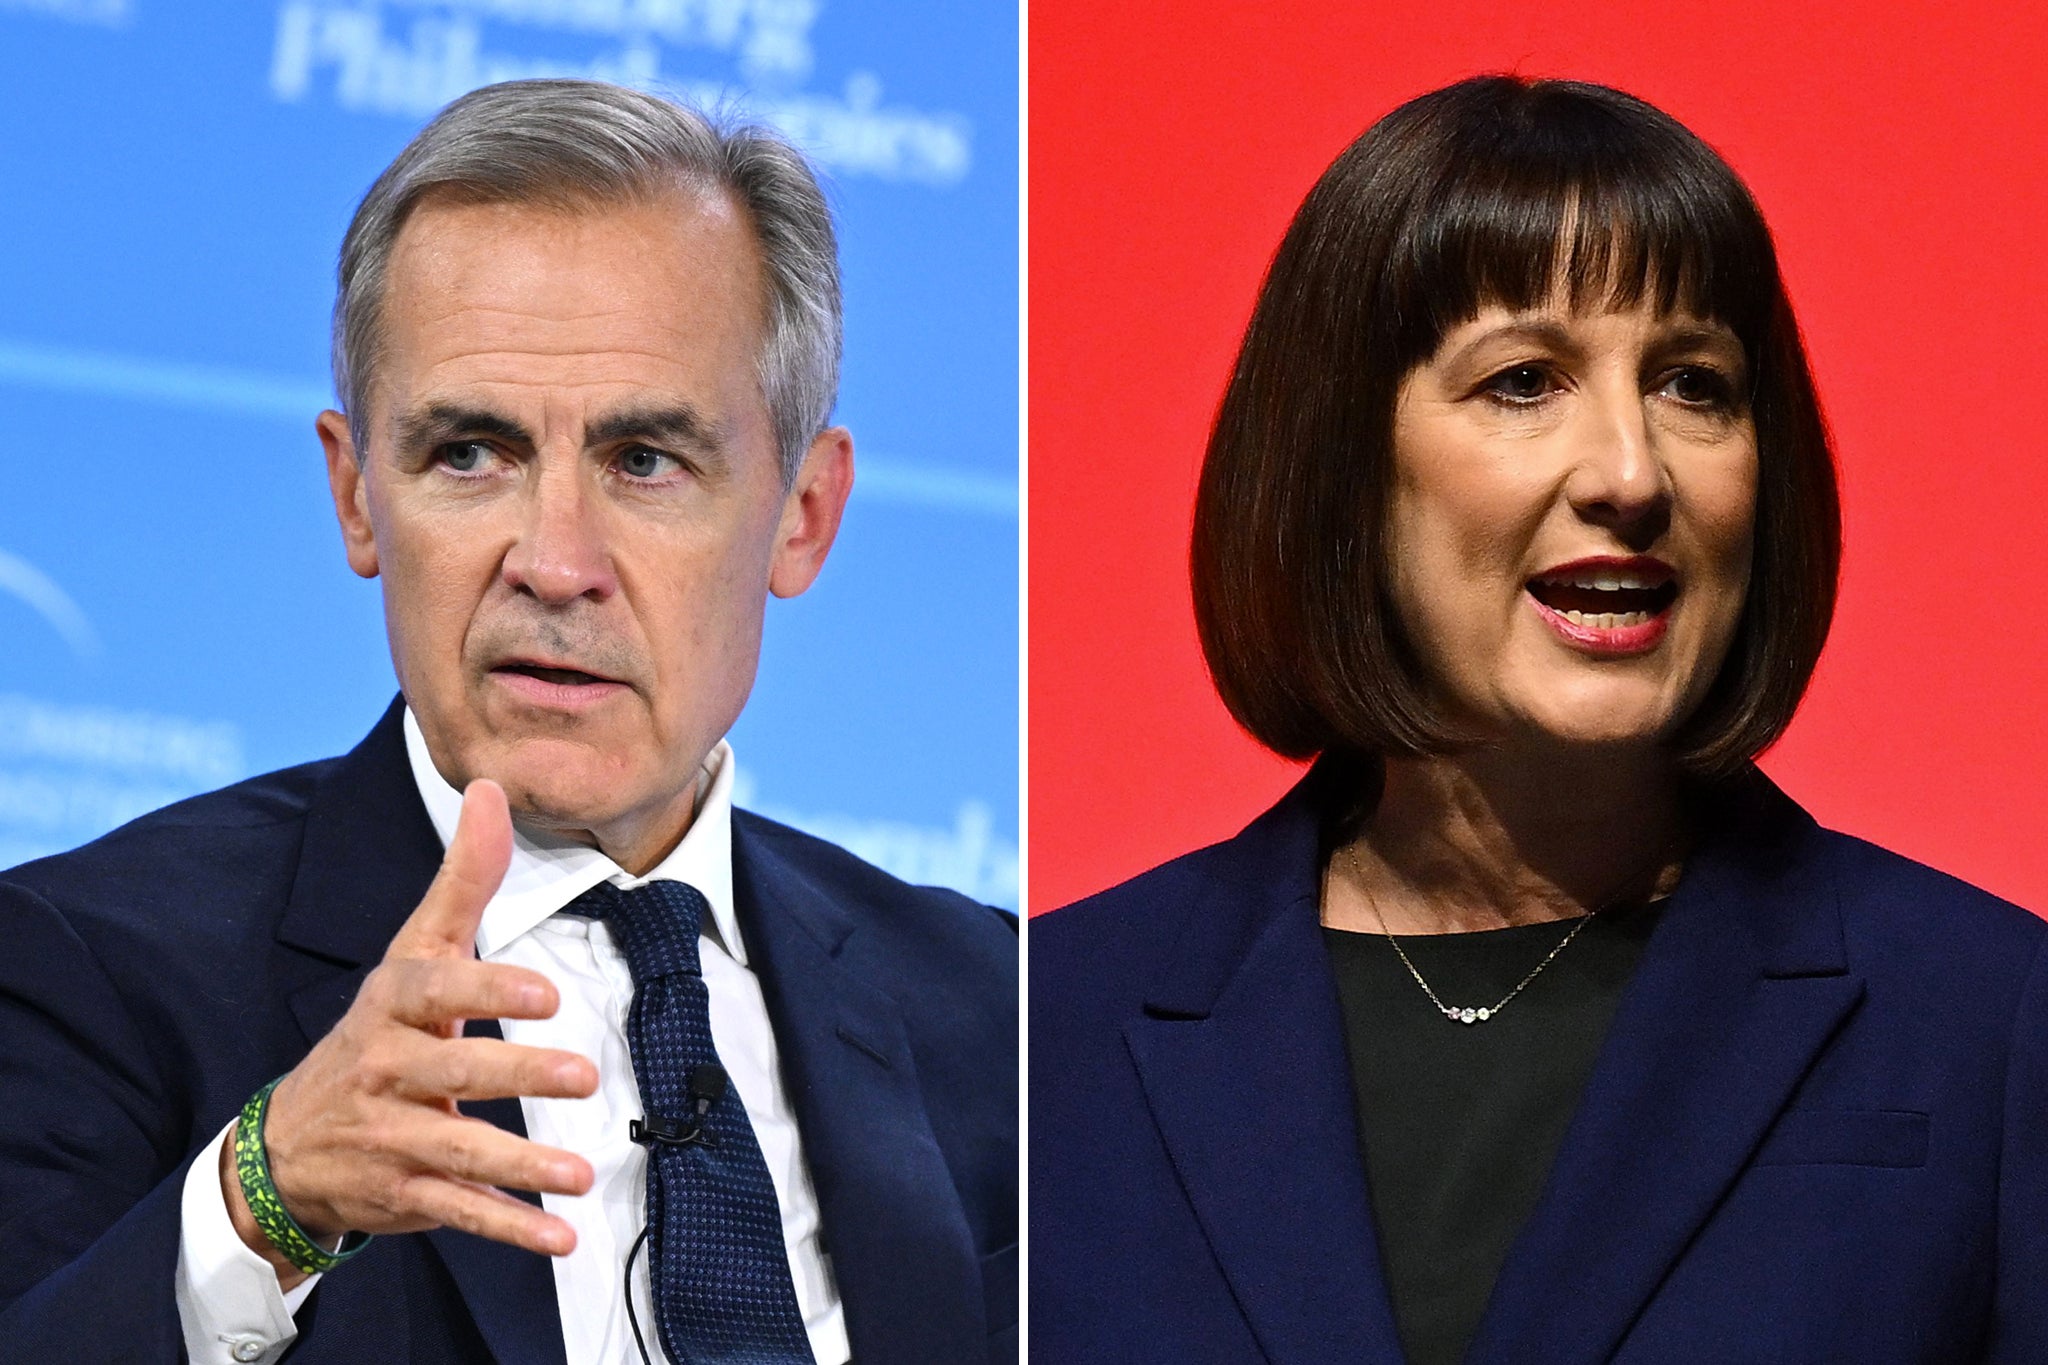 Former Bank of England governor Mark Carney backed Rachel Reeves to be the next chancellor